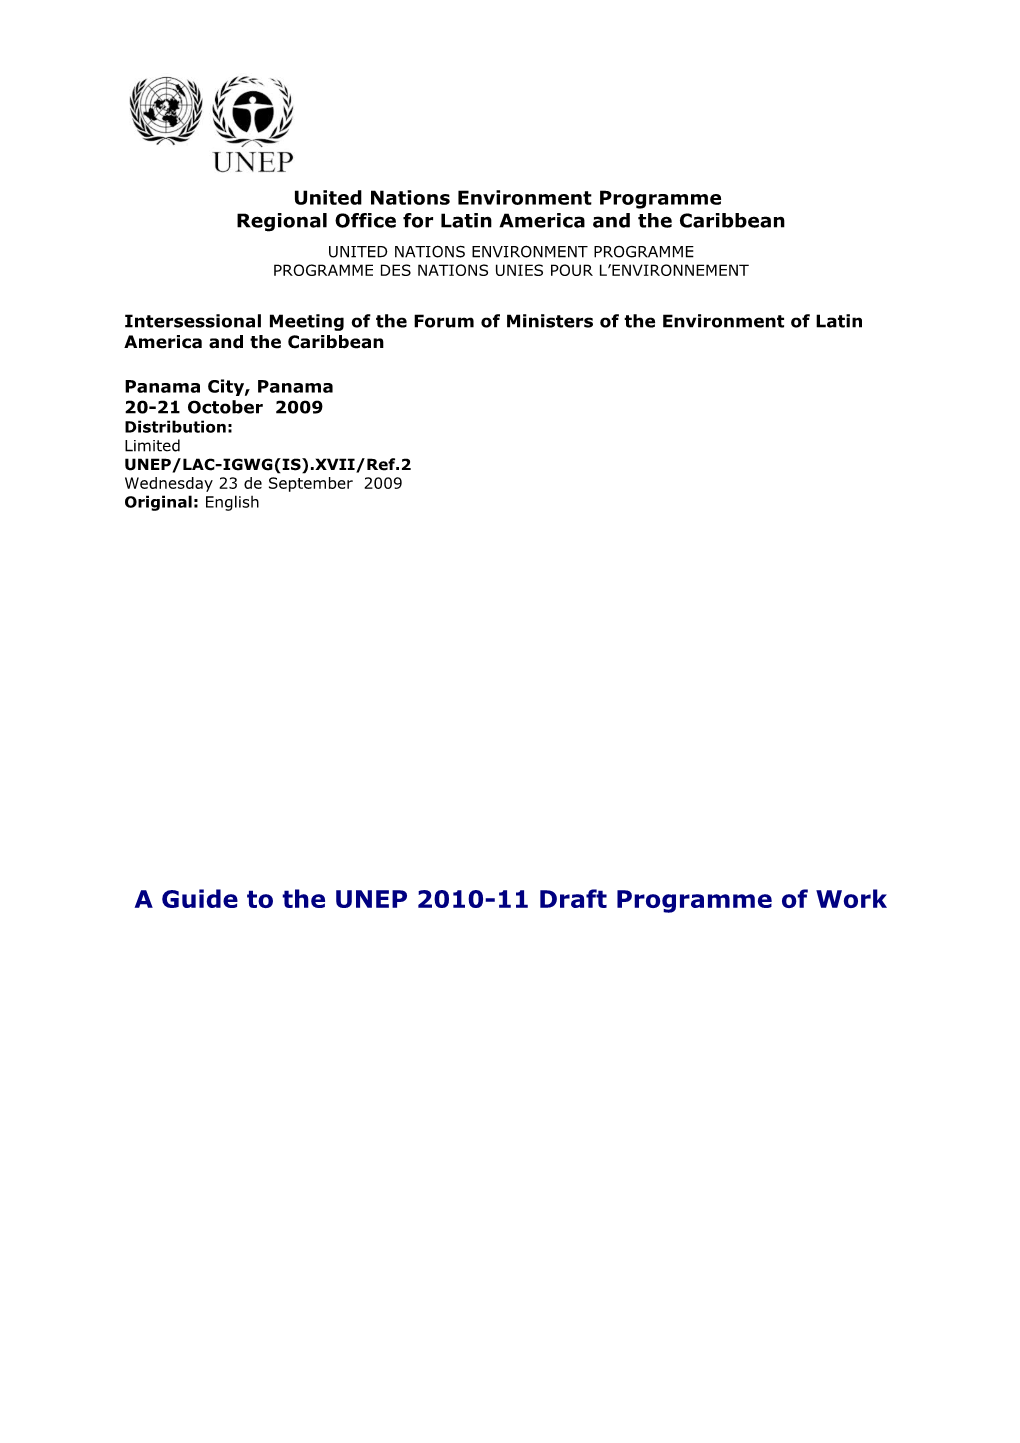 A Guide to the UNEP 2010-11 Draft Programme of Work